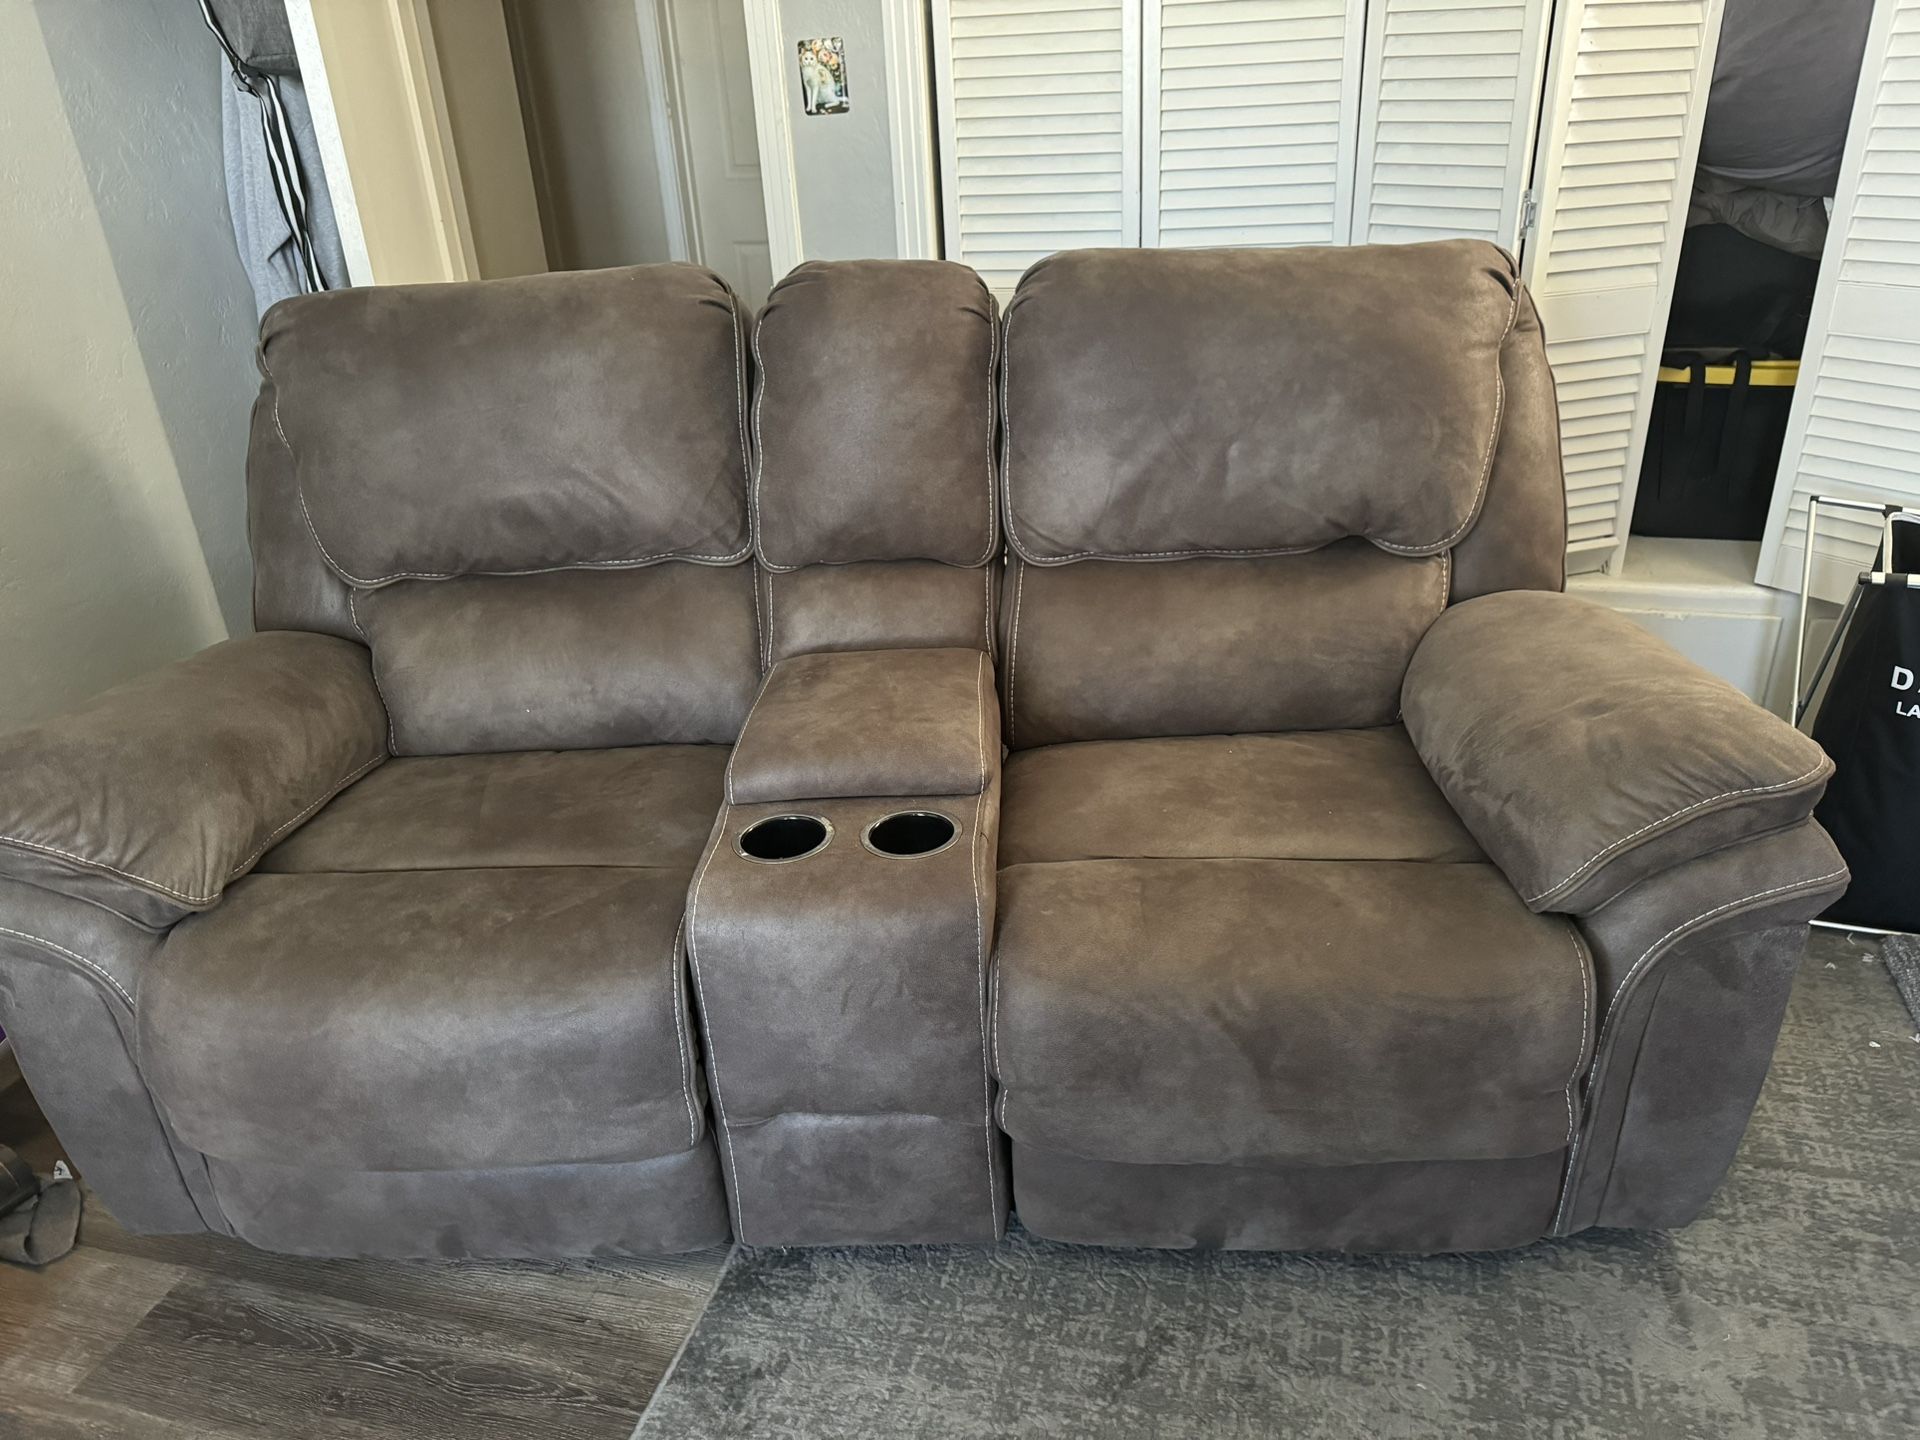 2 Seater Recliner 